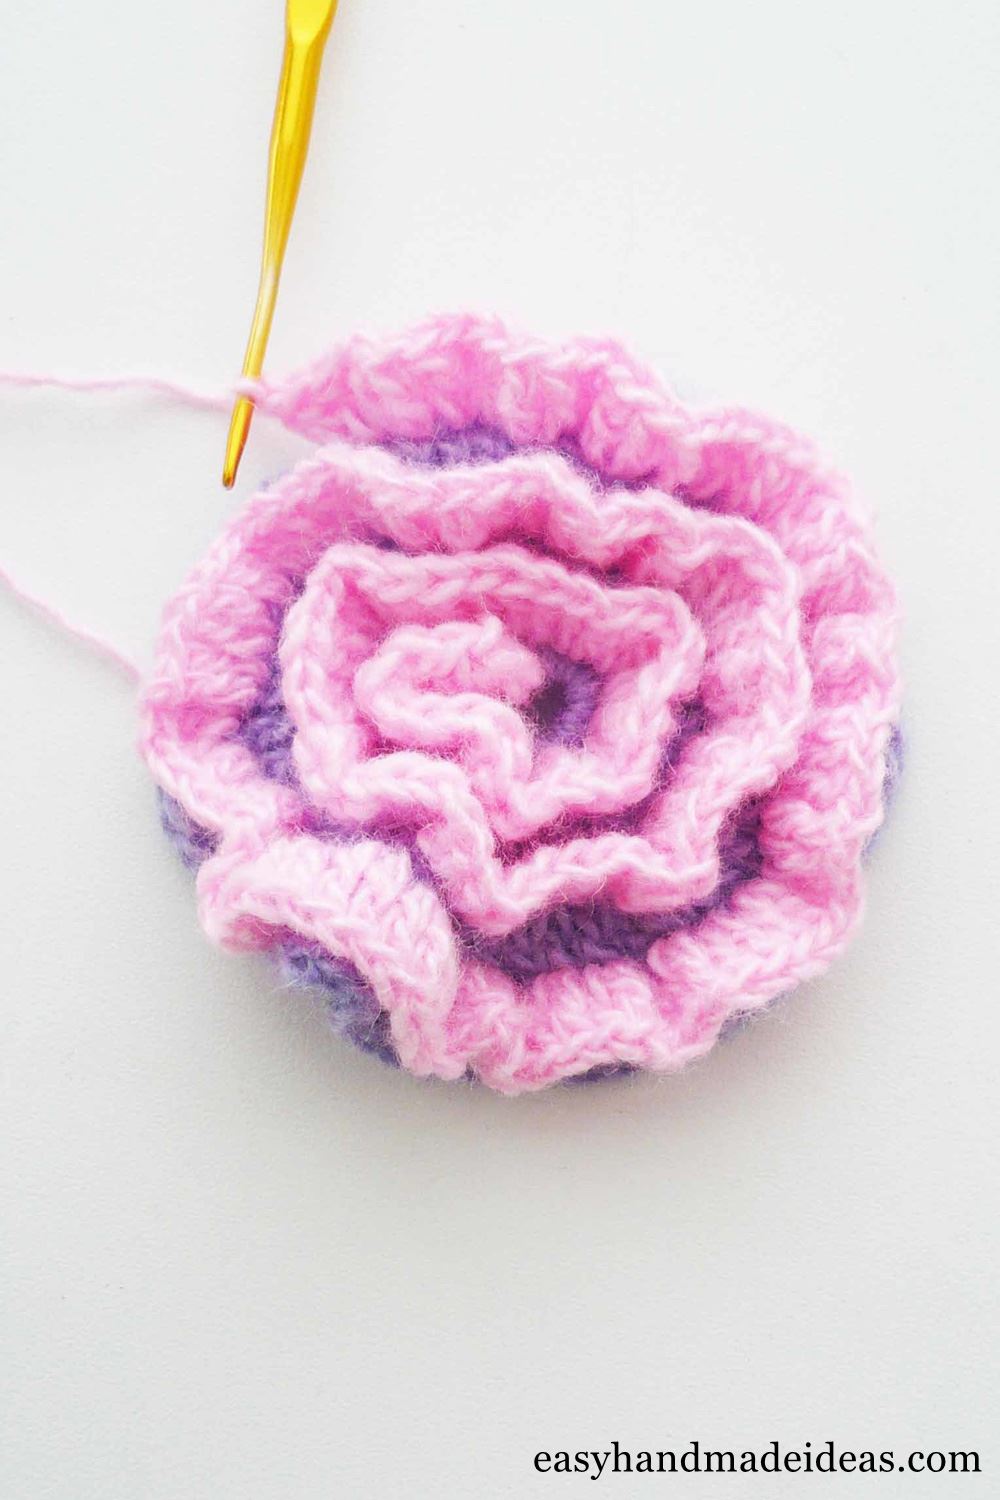 Crocheted pink part of the flower